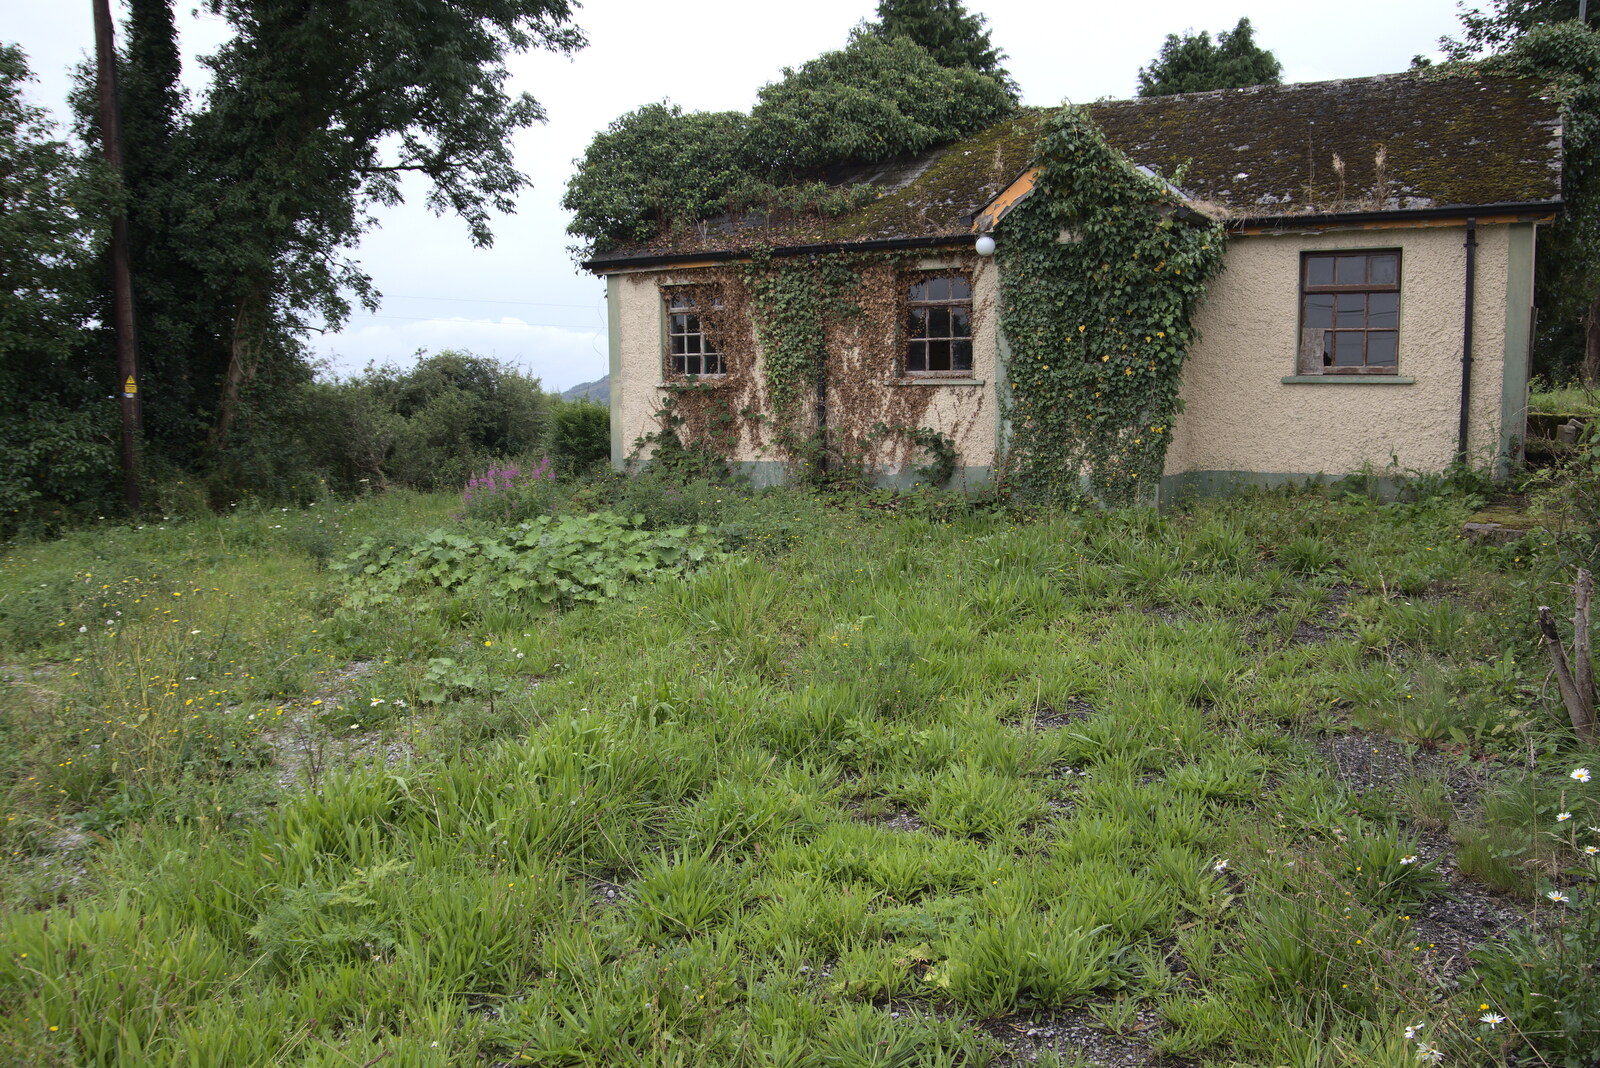 A derelict cottage from Manorhamilton and the Street Art of Dún Laoghaire, Ireland - 15th August 2021